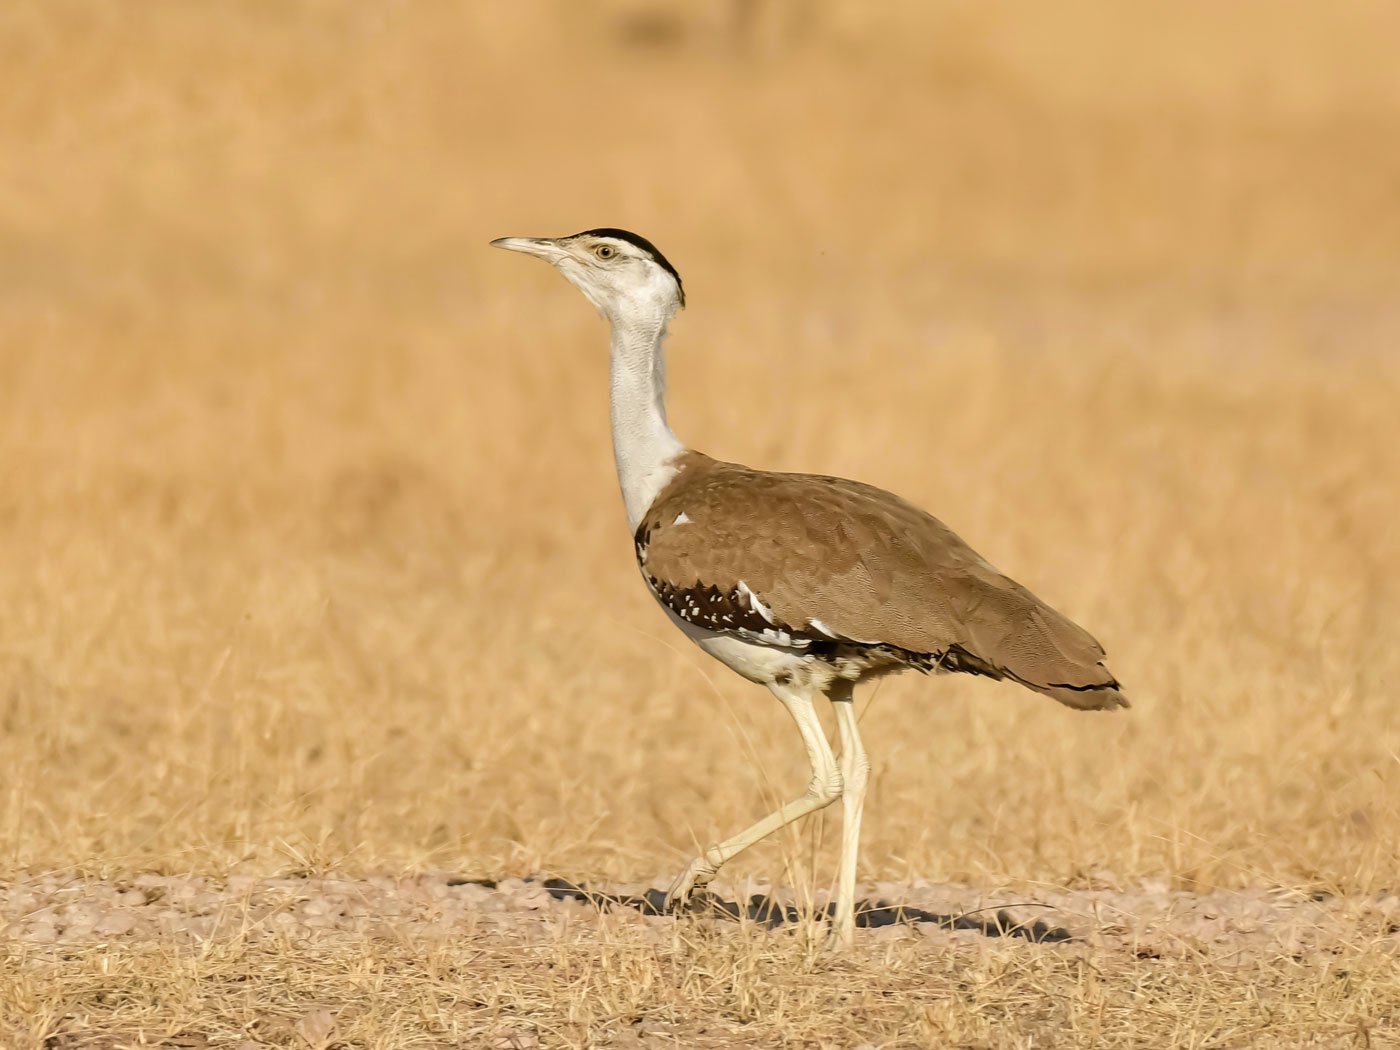 Today there are totally only around 120-150 Great Indian Bustards in the world and most live in Jaisalmer district